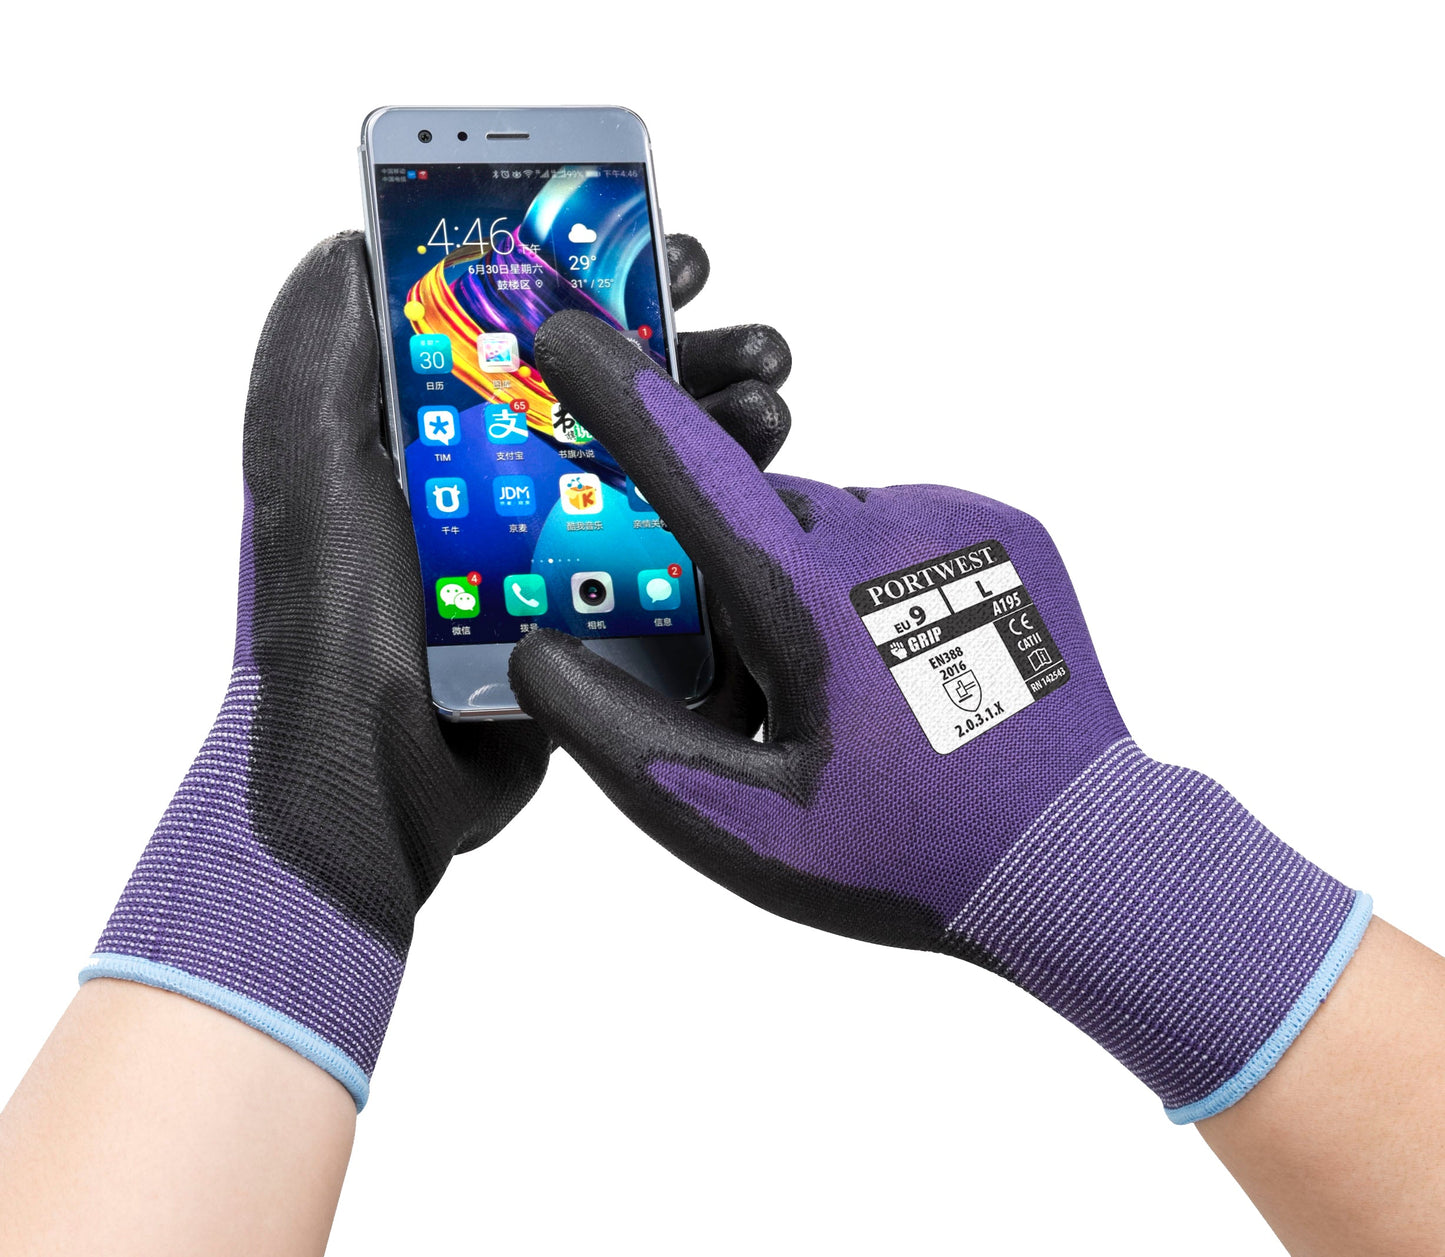 Portwest PU Touchscreen Glove A195 - New England Safety Supply